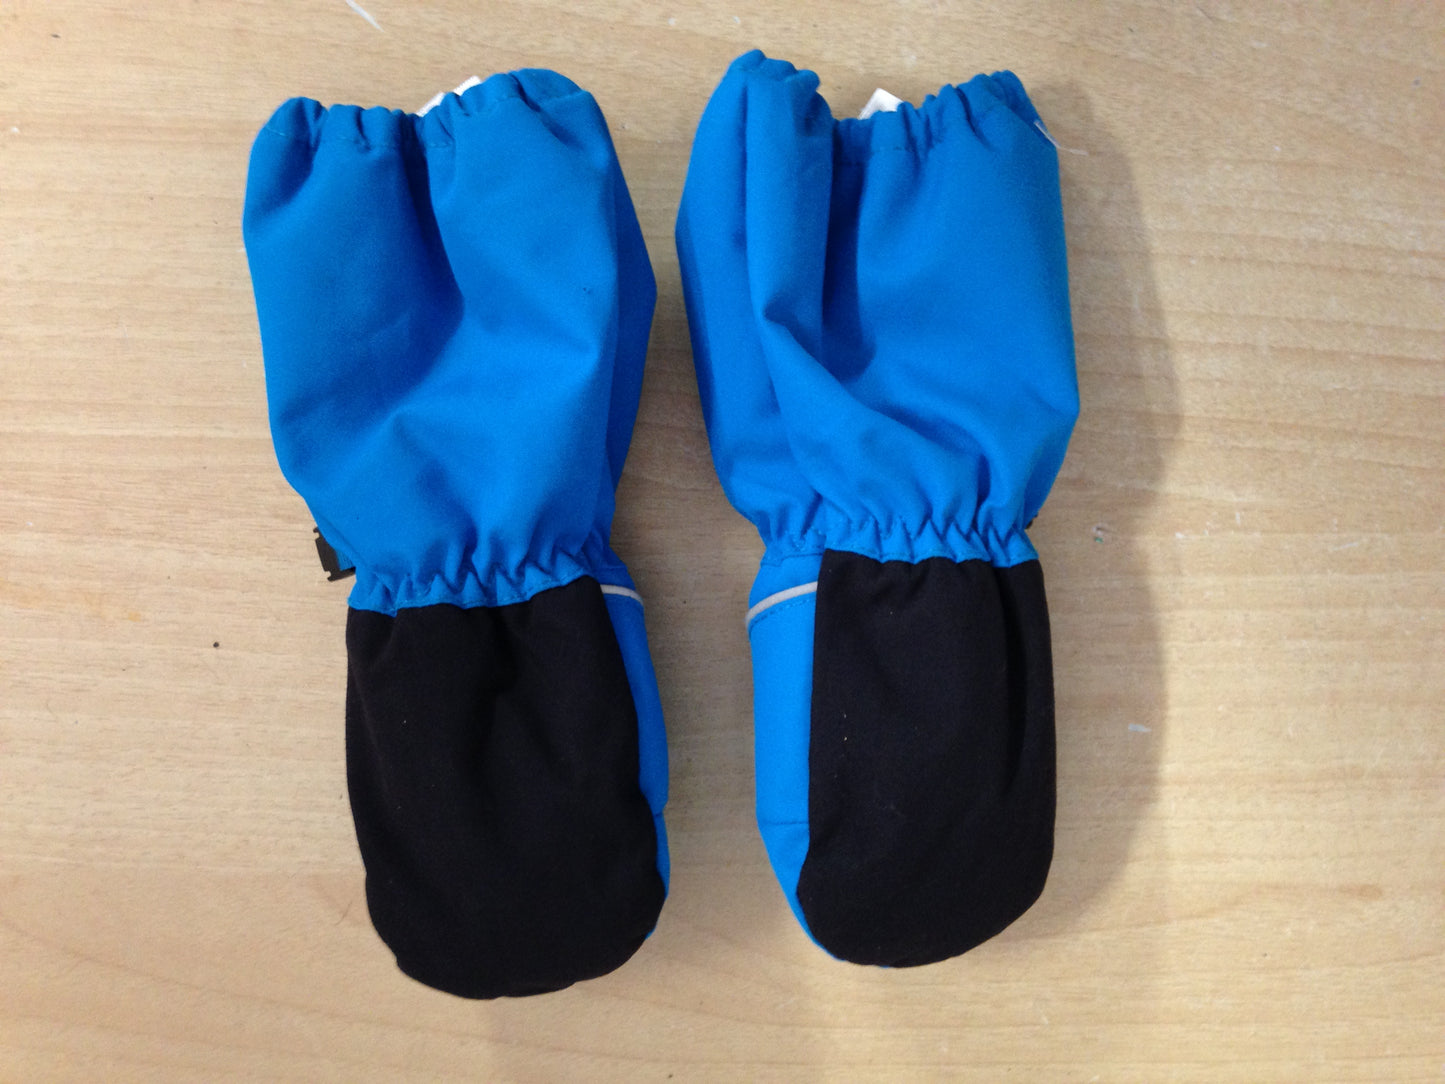 Winter Gloves and Mitts Child Size 1-3 Infant MEC Aqua Blue  Waterproof Excellent Snowboarding